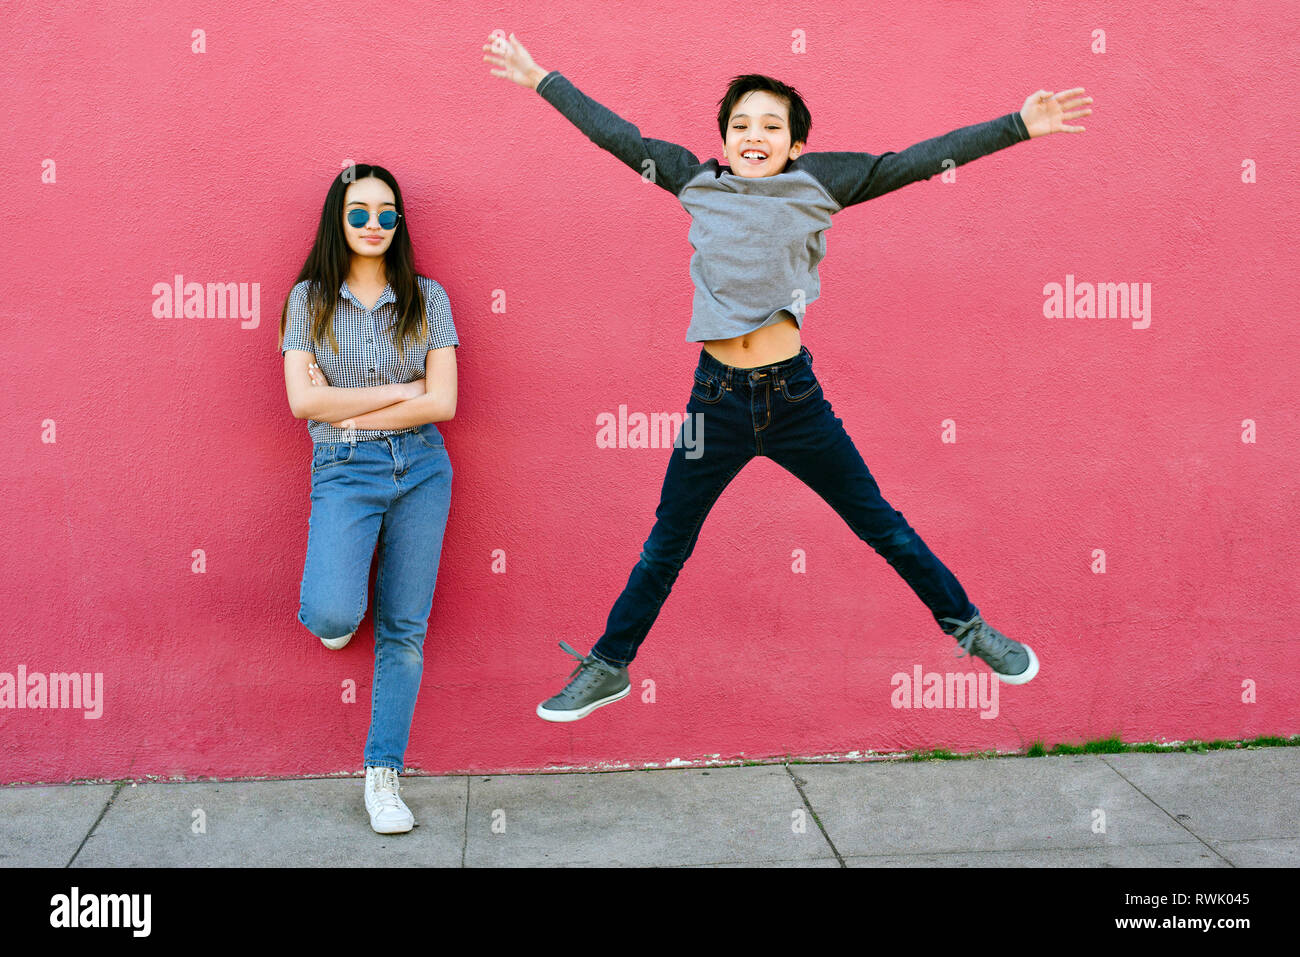 A little boy tries to impress his older sister by jumping high.  She stands against an urban wall unimpressed Stock Photo